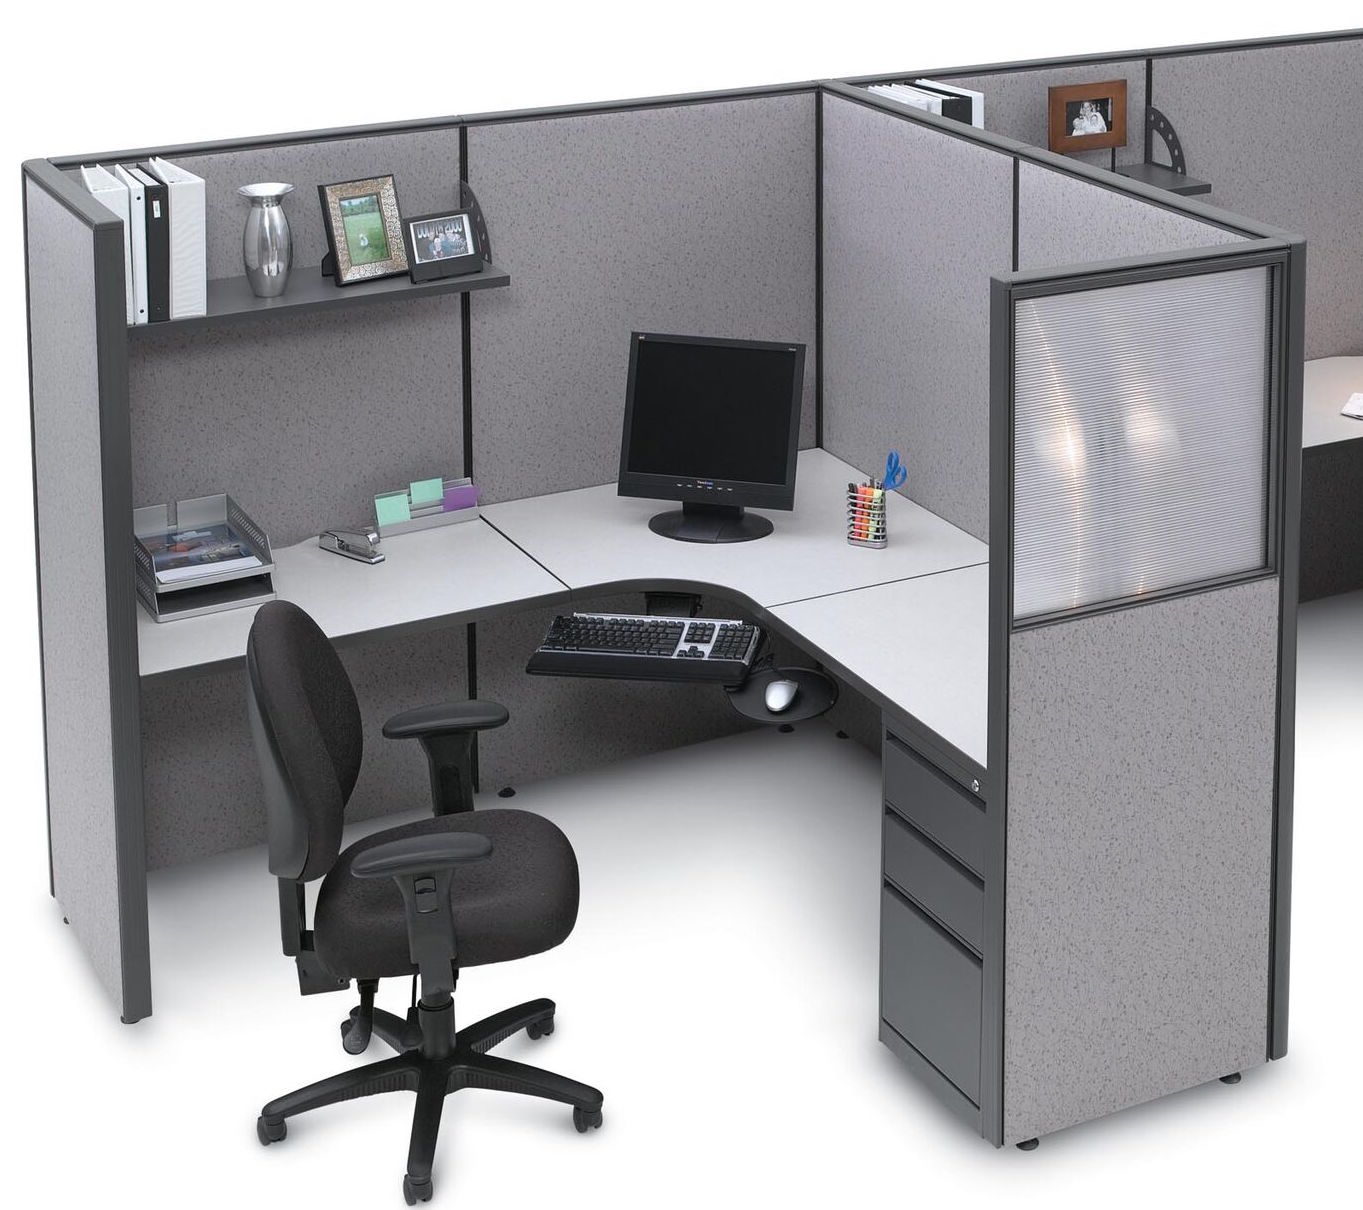 MaxSpace *Add On* 66h 6x6 cubicle - Office Furniture Chicago - New - Used -  Refurbished